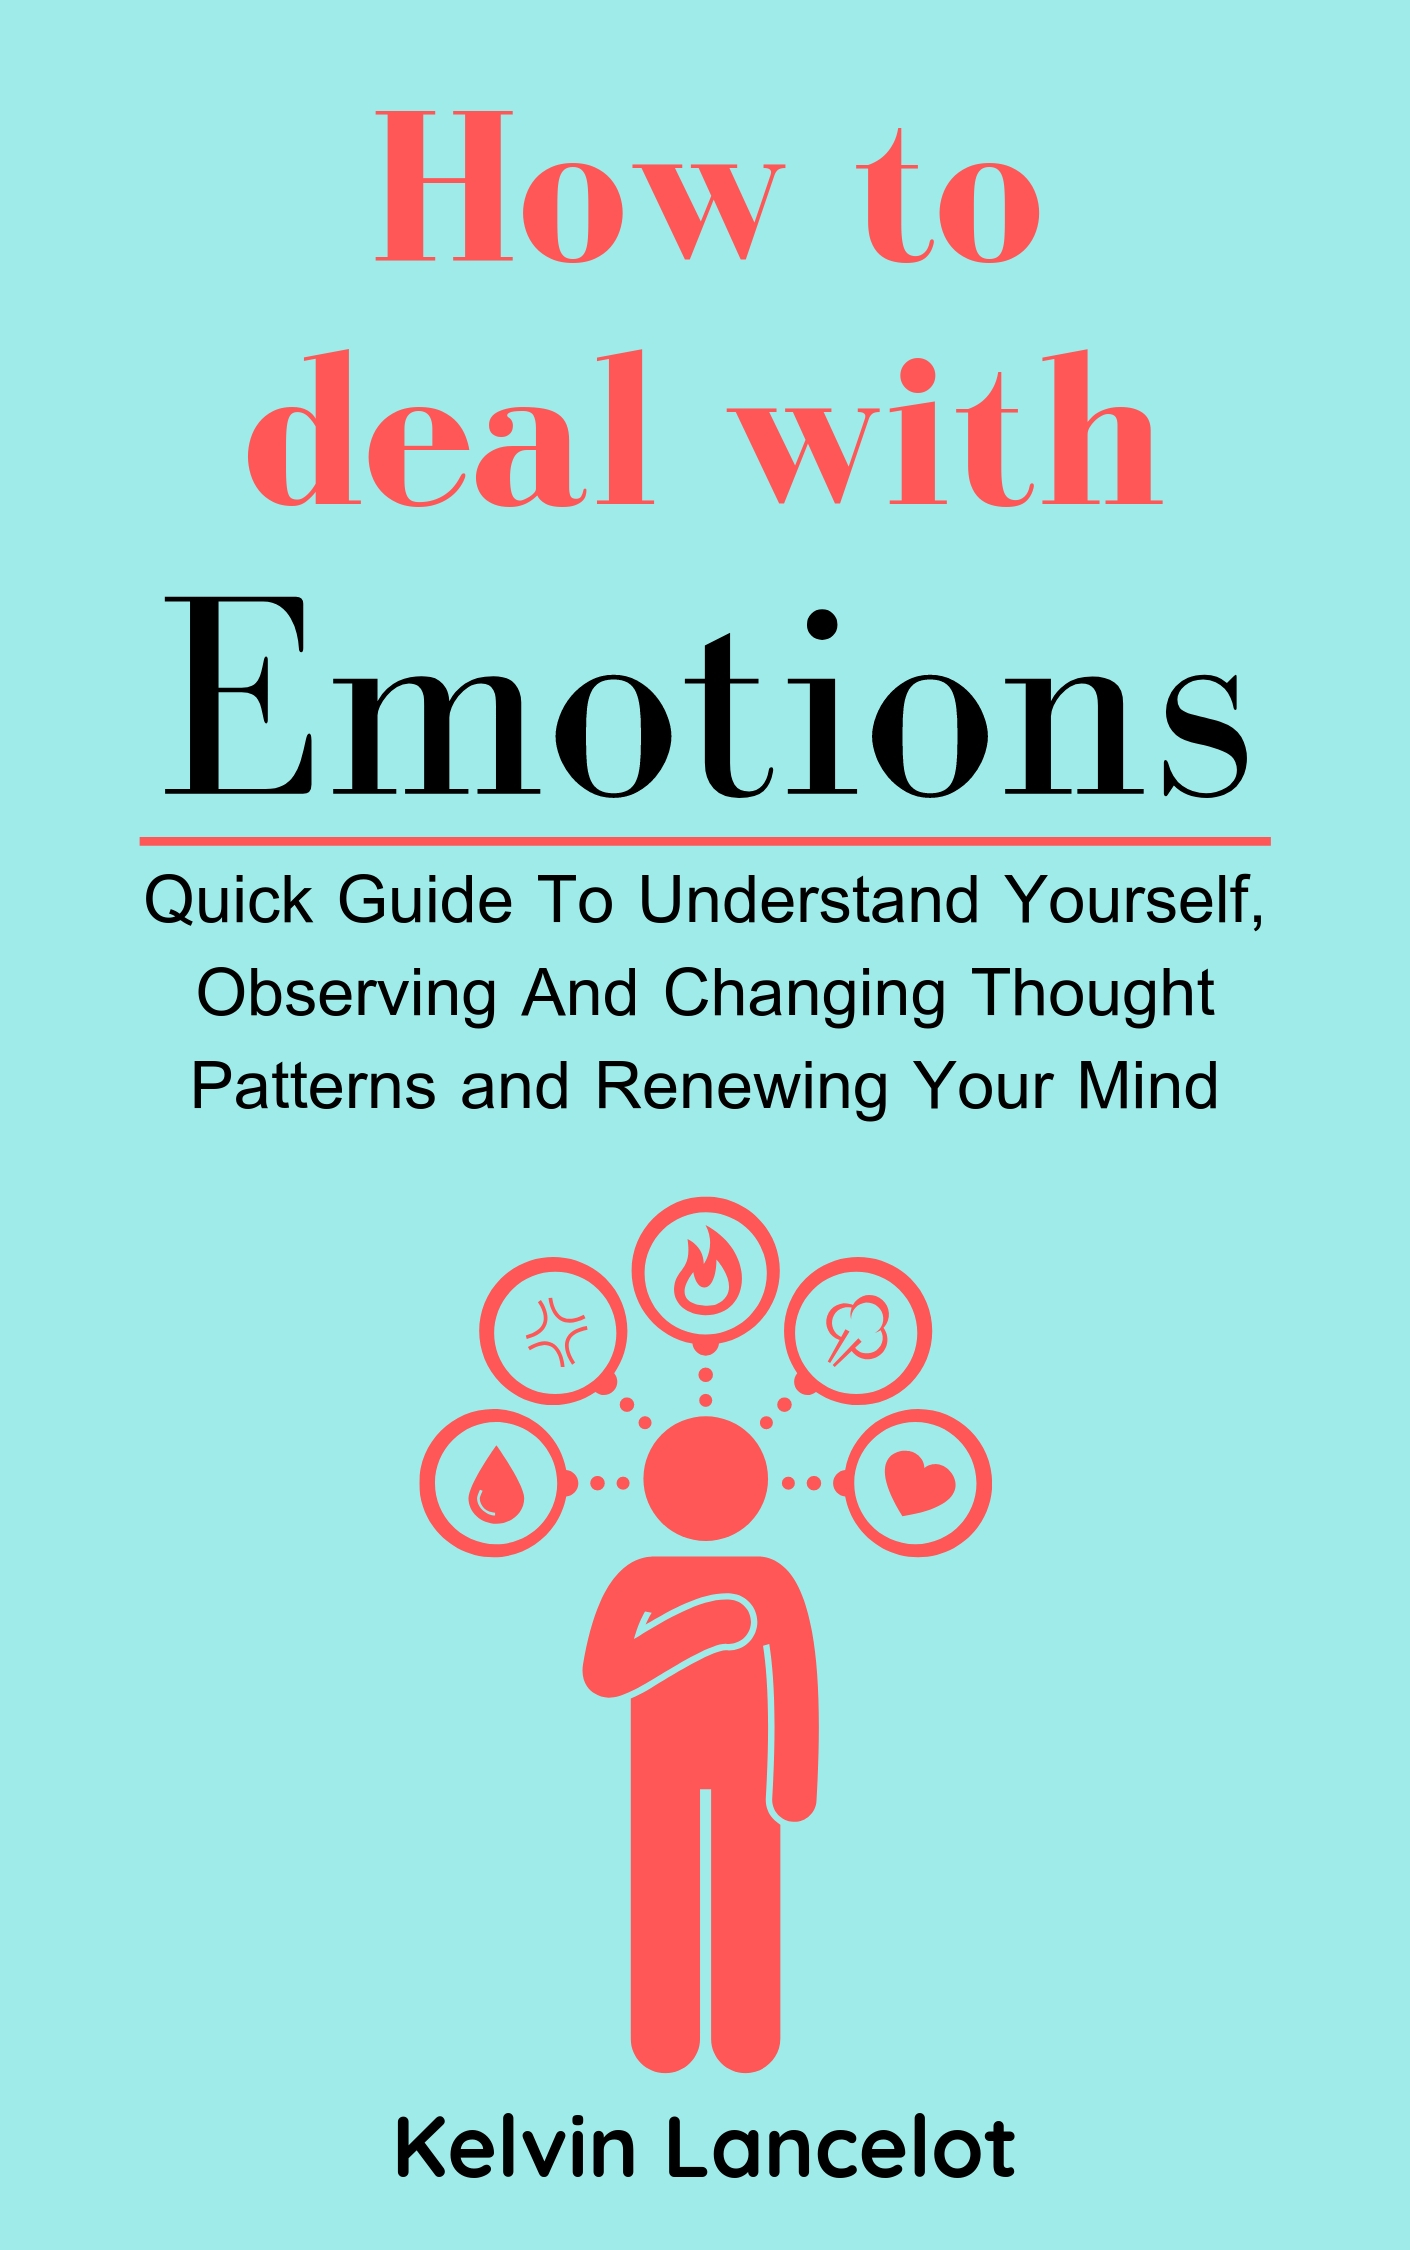 FREE: How to Deal with Emotions: a Quick Guide To Understand Yourself, Observing And Changing Thought Patterns and Renewing Your Mind by Kelvin Lancelot